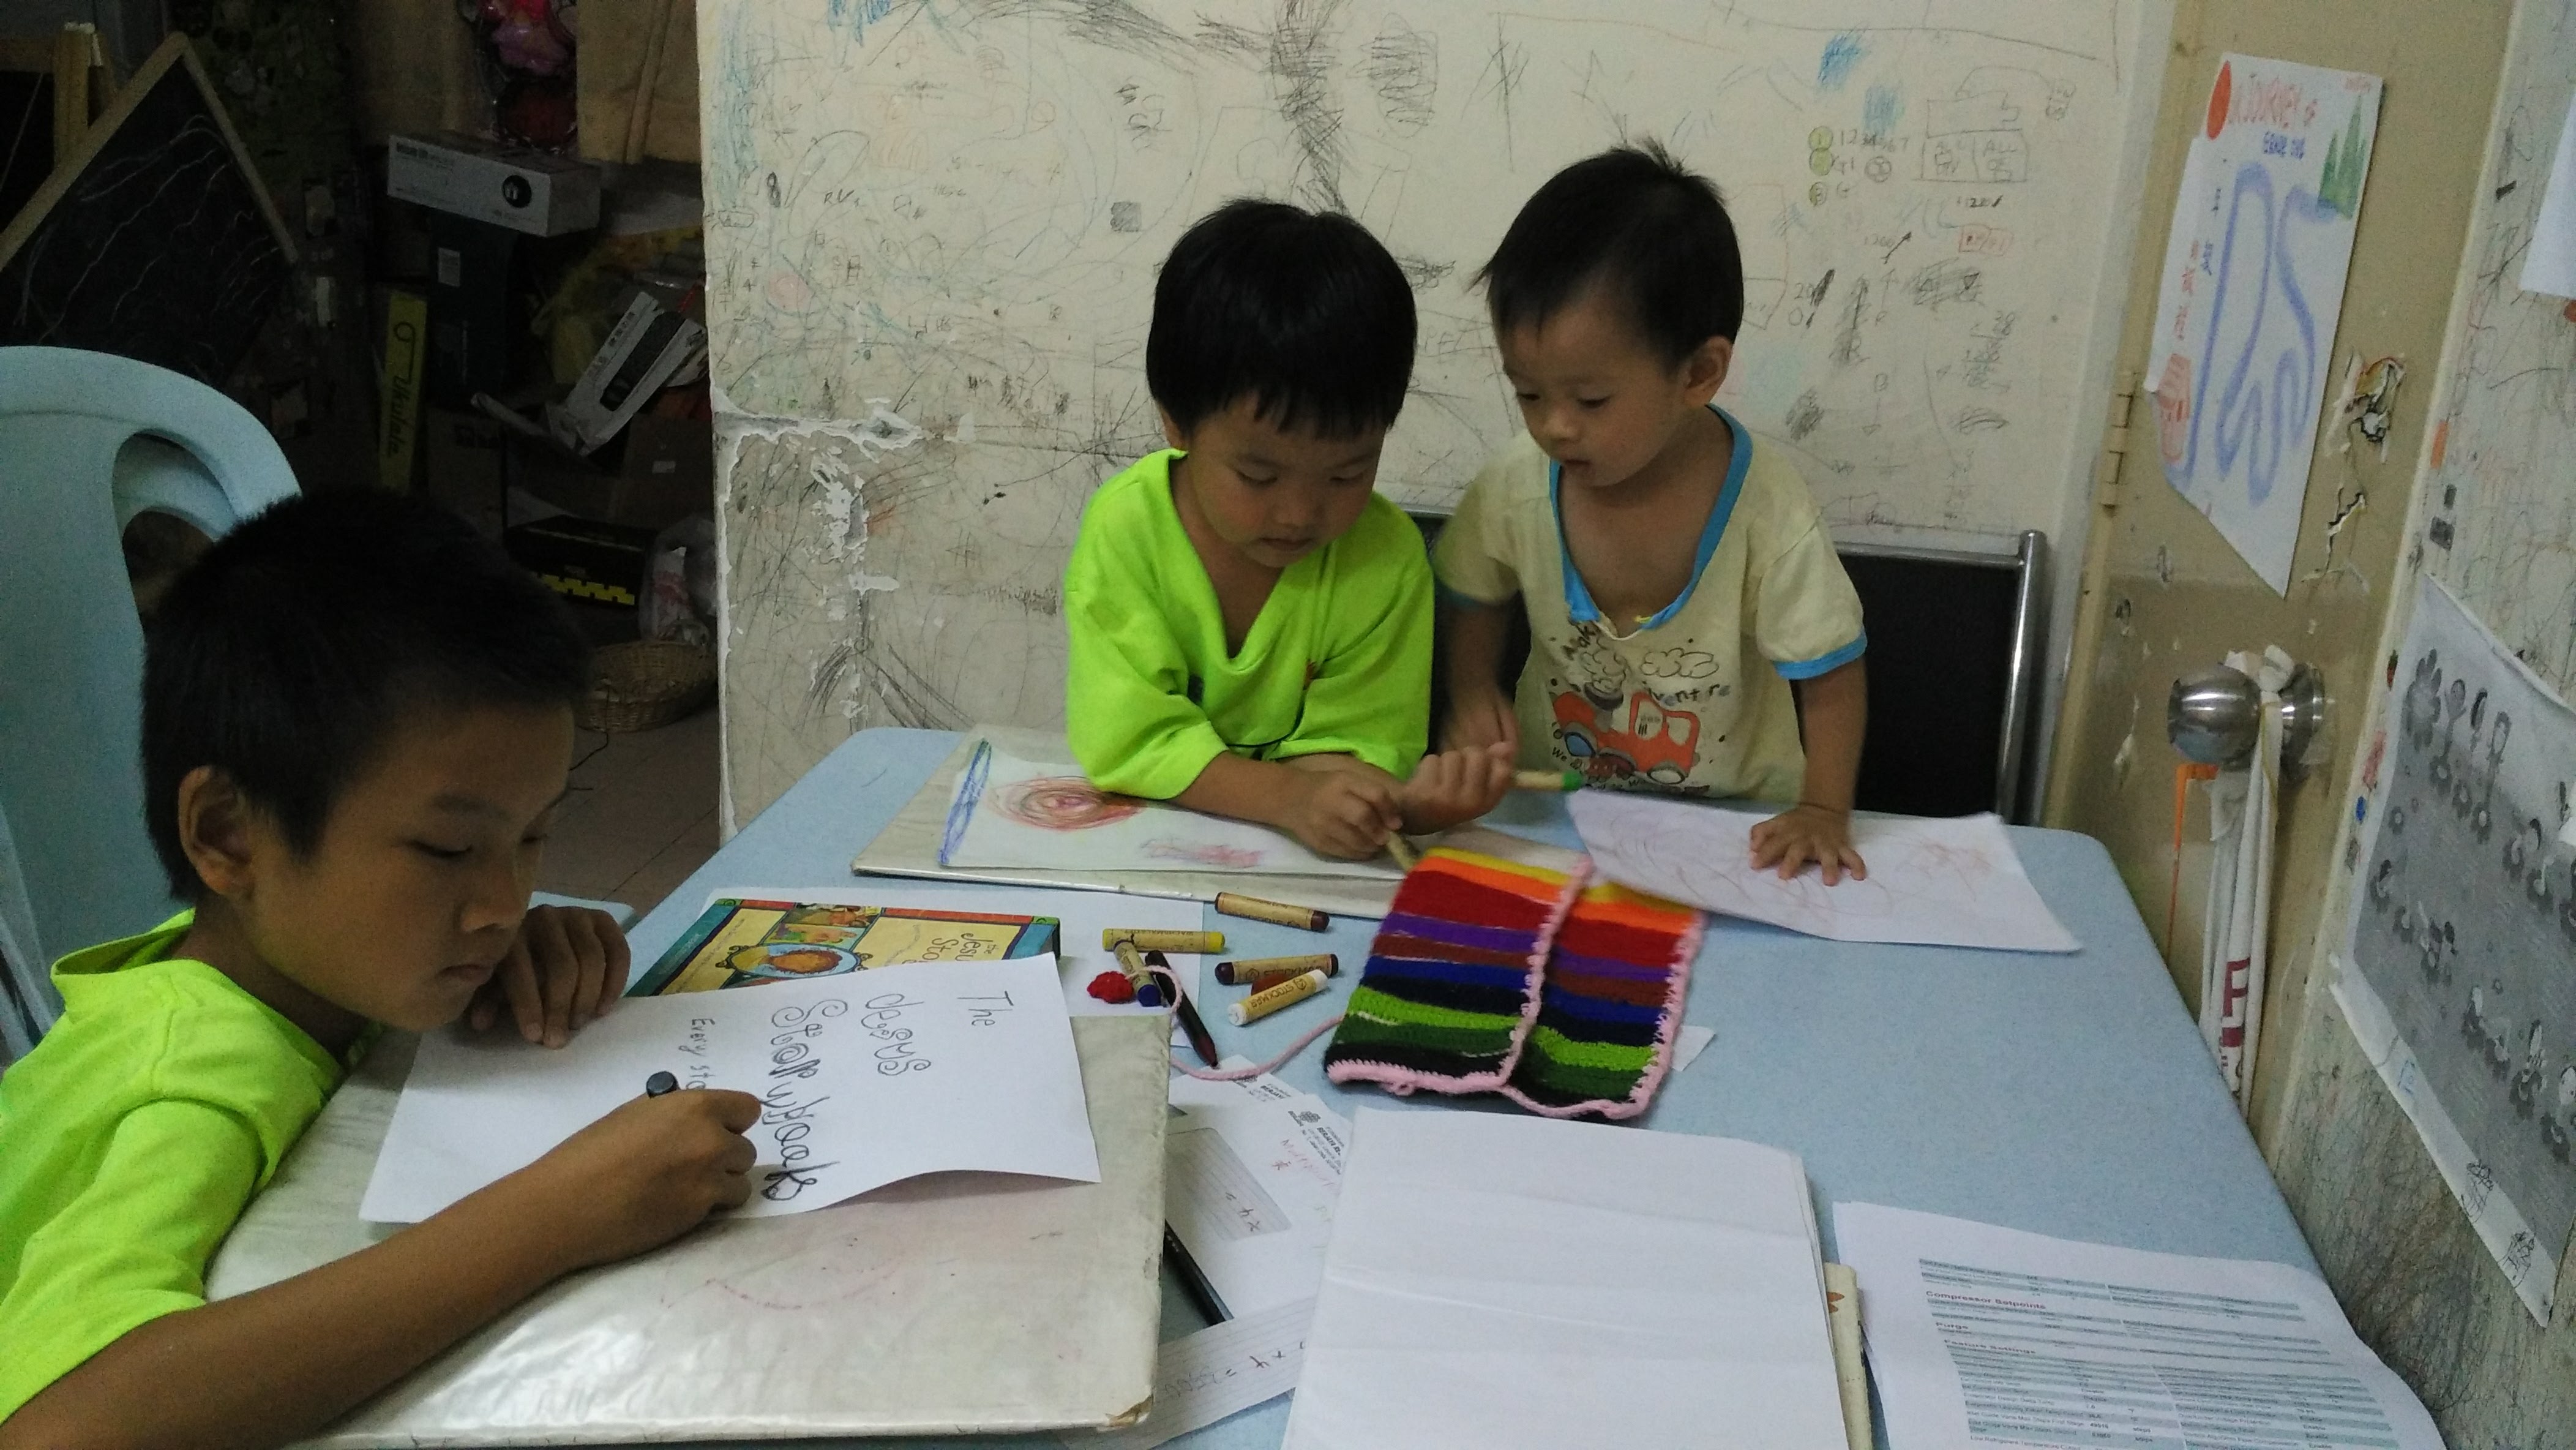 Kids drawing together